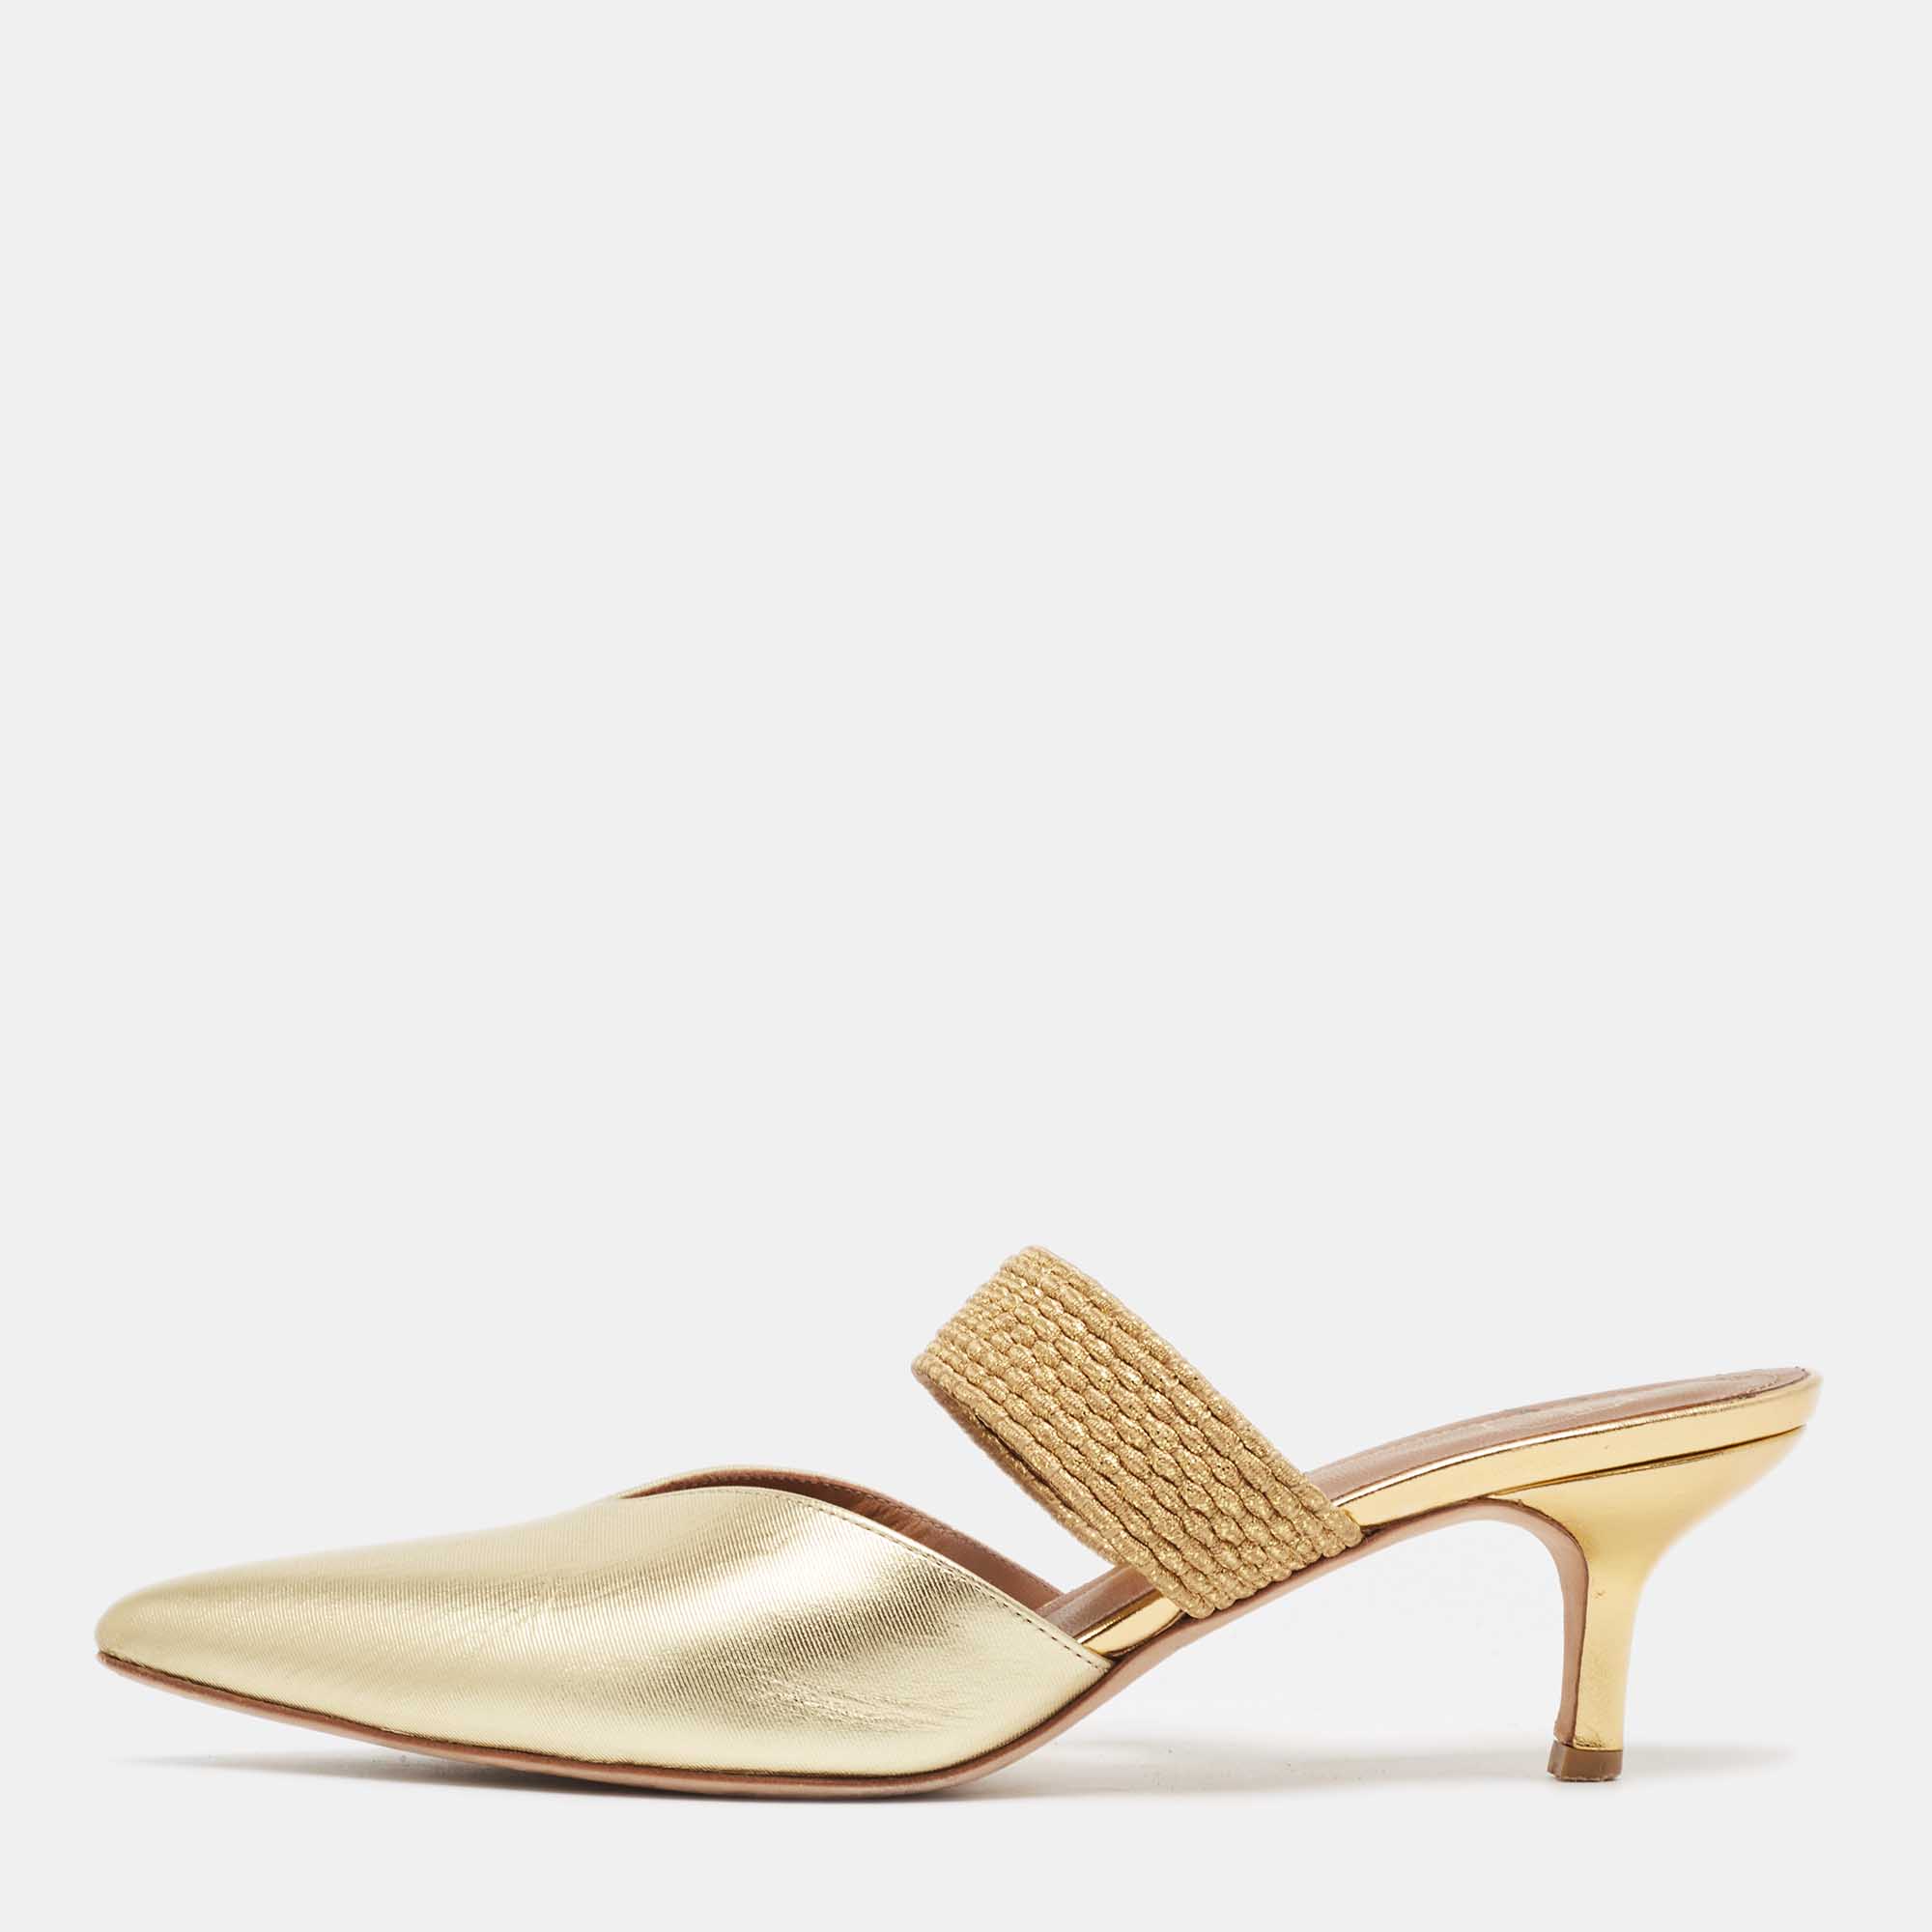 Malone souliers gold leather maisie mules size 38.5